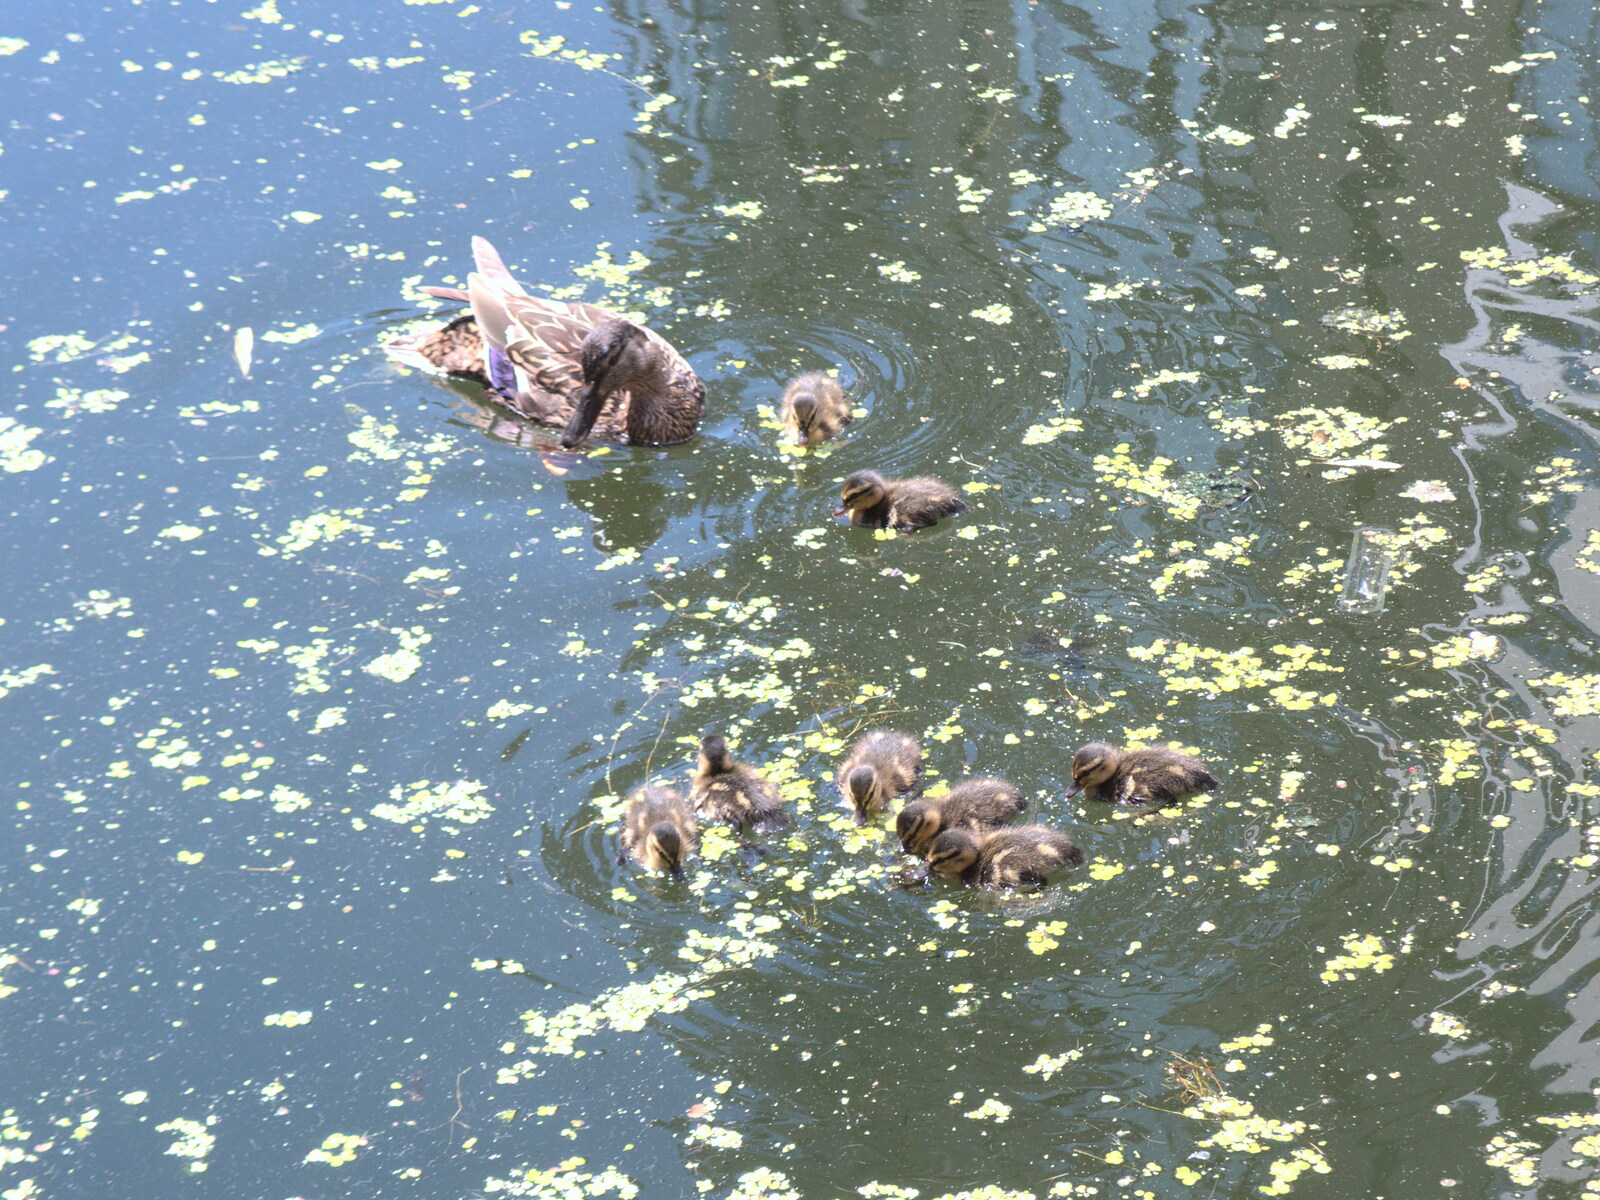 There are some fluffy ducklings in Paddington Basin from A SwiftKey Lunch, Porchester Place,  Edgware Road, London - 27th June 2018